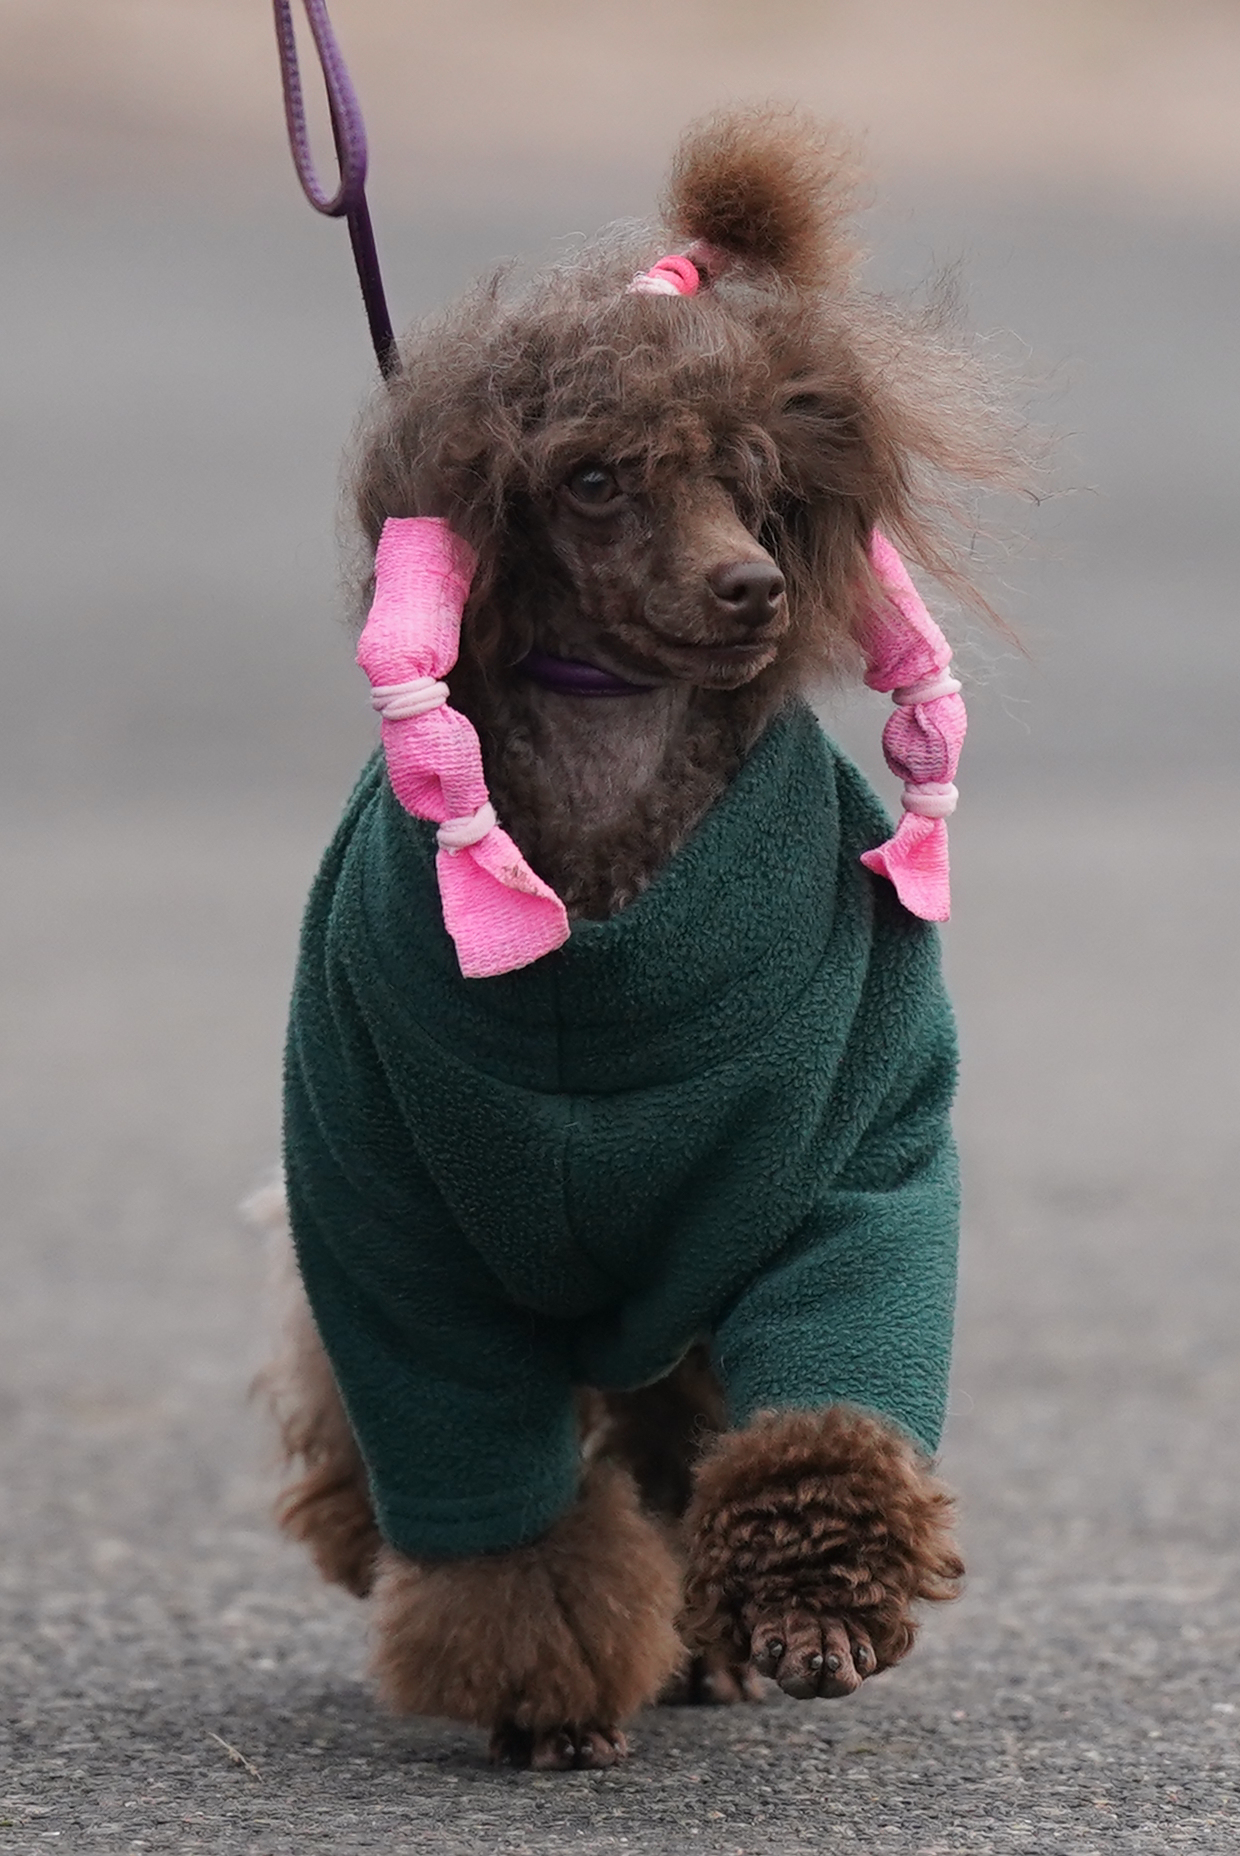 A dog wearing a green coat and pink hair accessories 